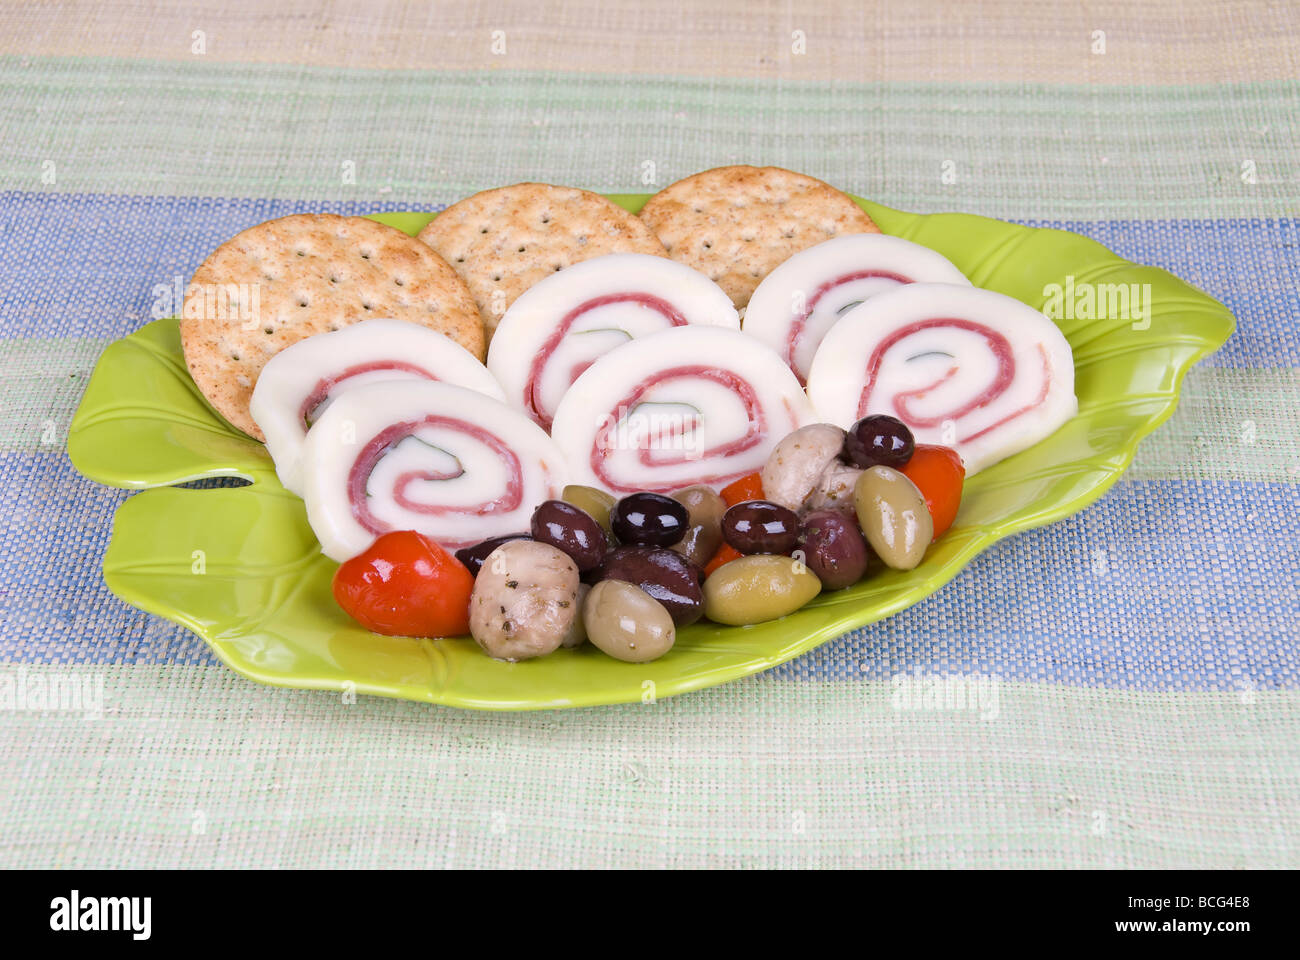 A yummy snack plate of prosciutto ham basil cheese rolls with an olive assortment and crackers Stock Photo